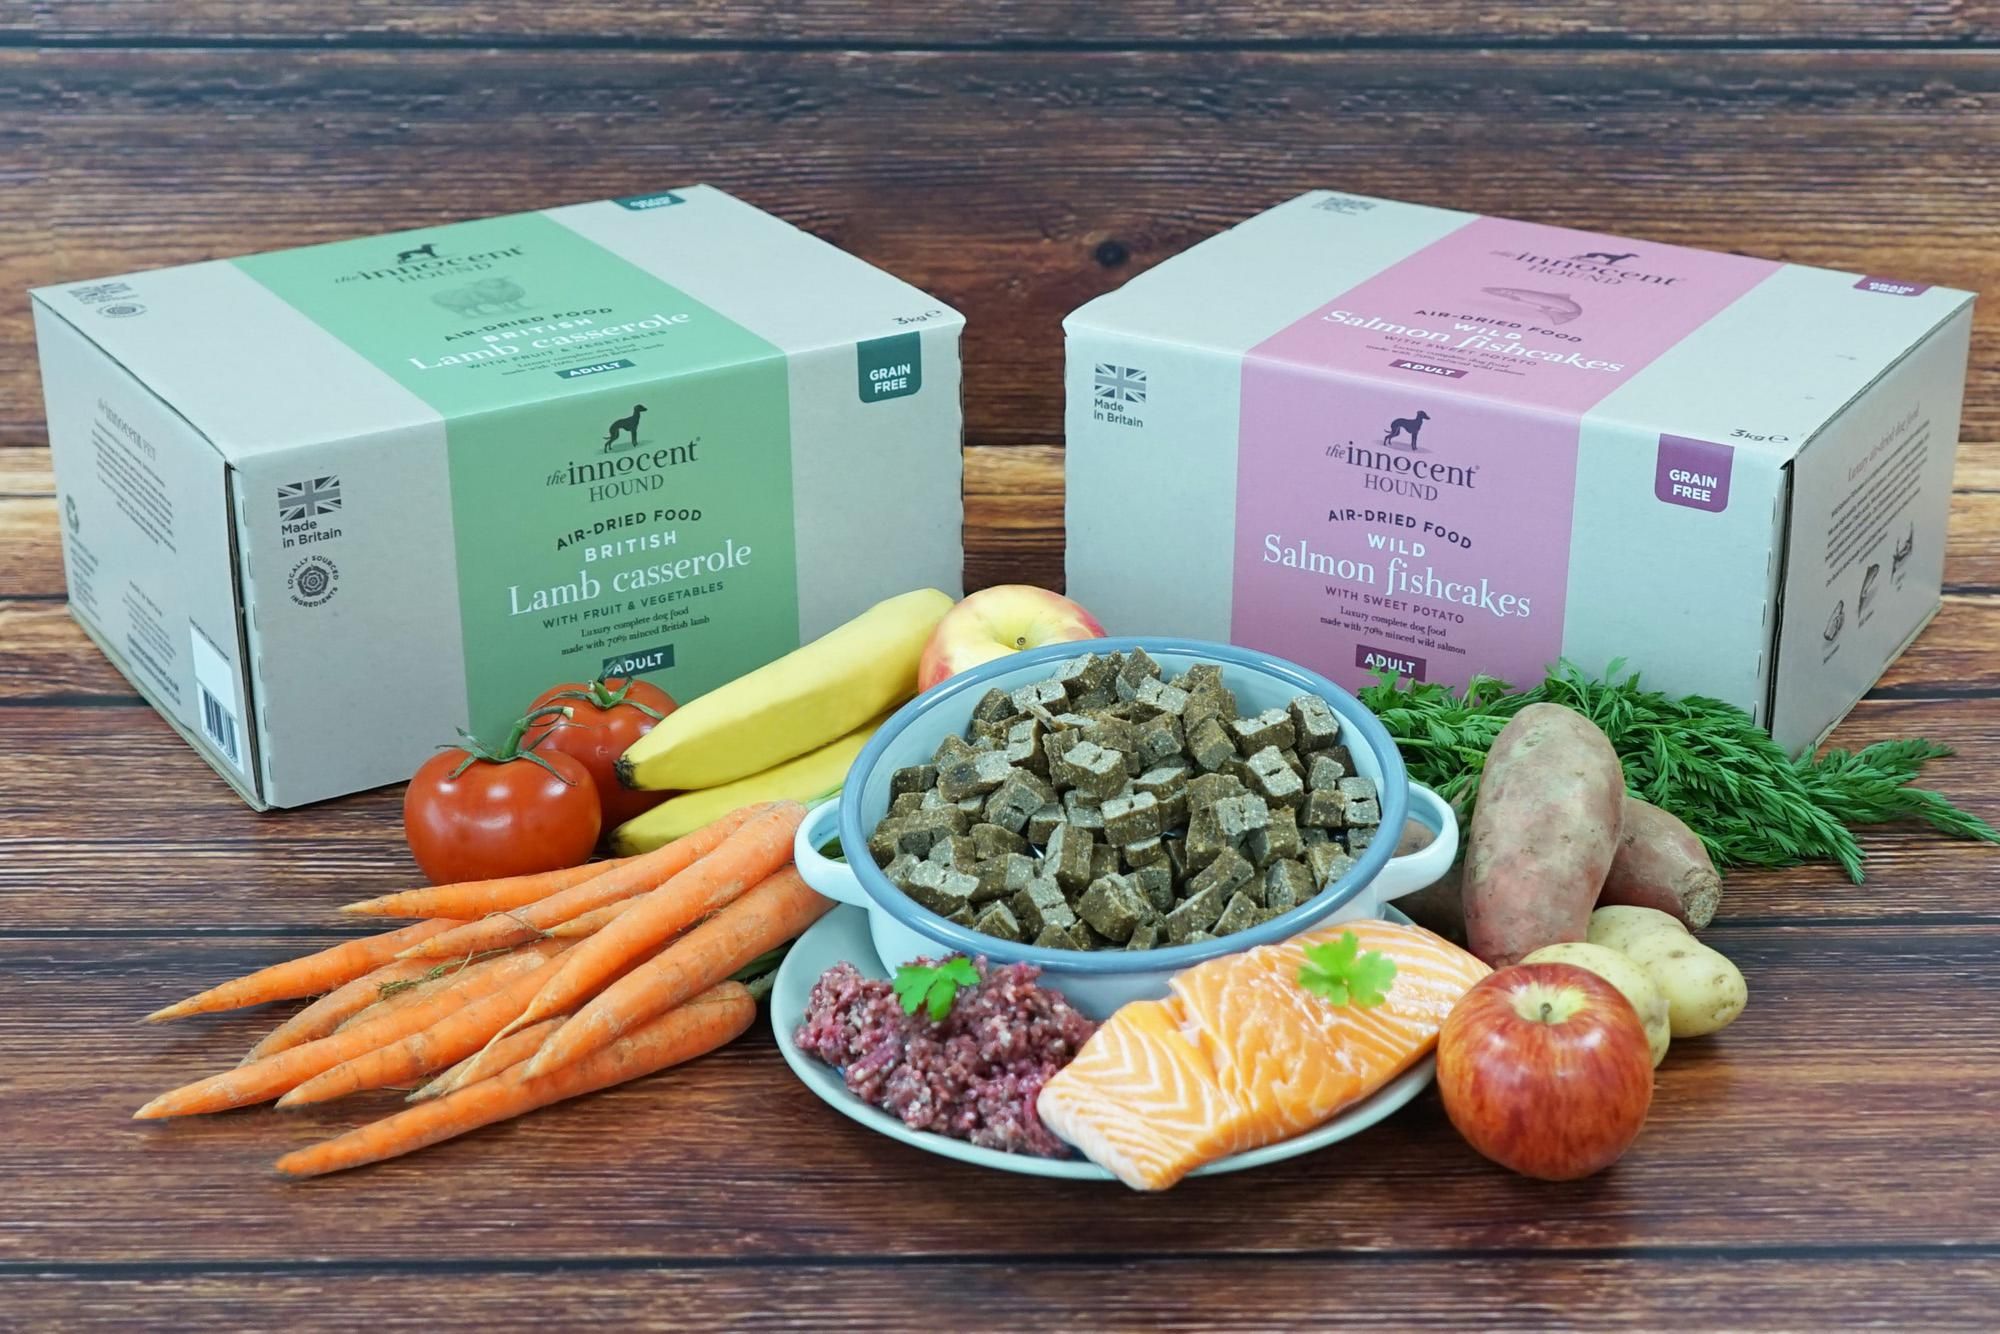 Innocent launches British Air-Dried Complete Food